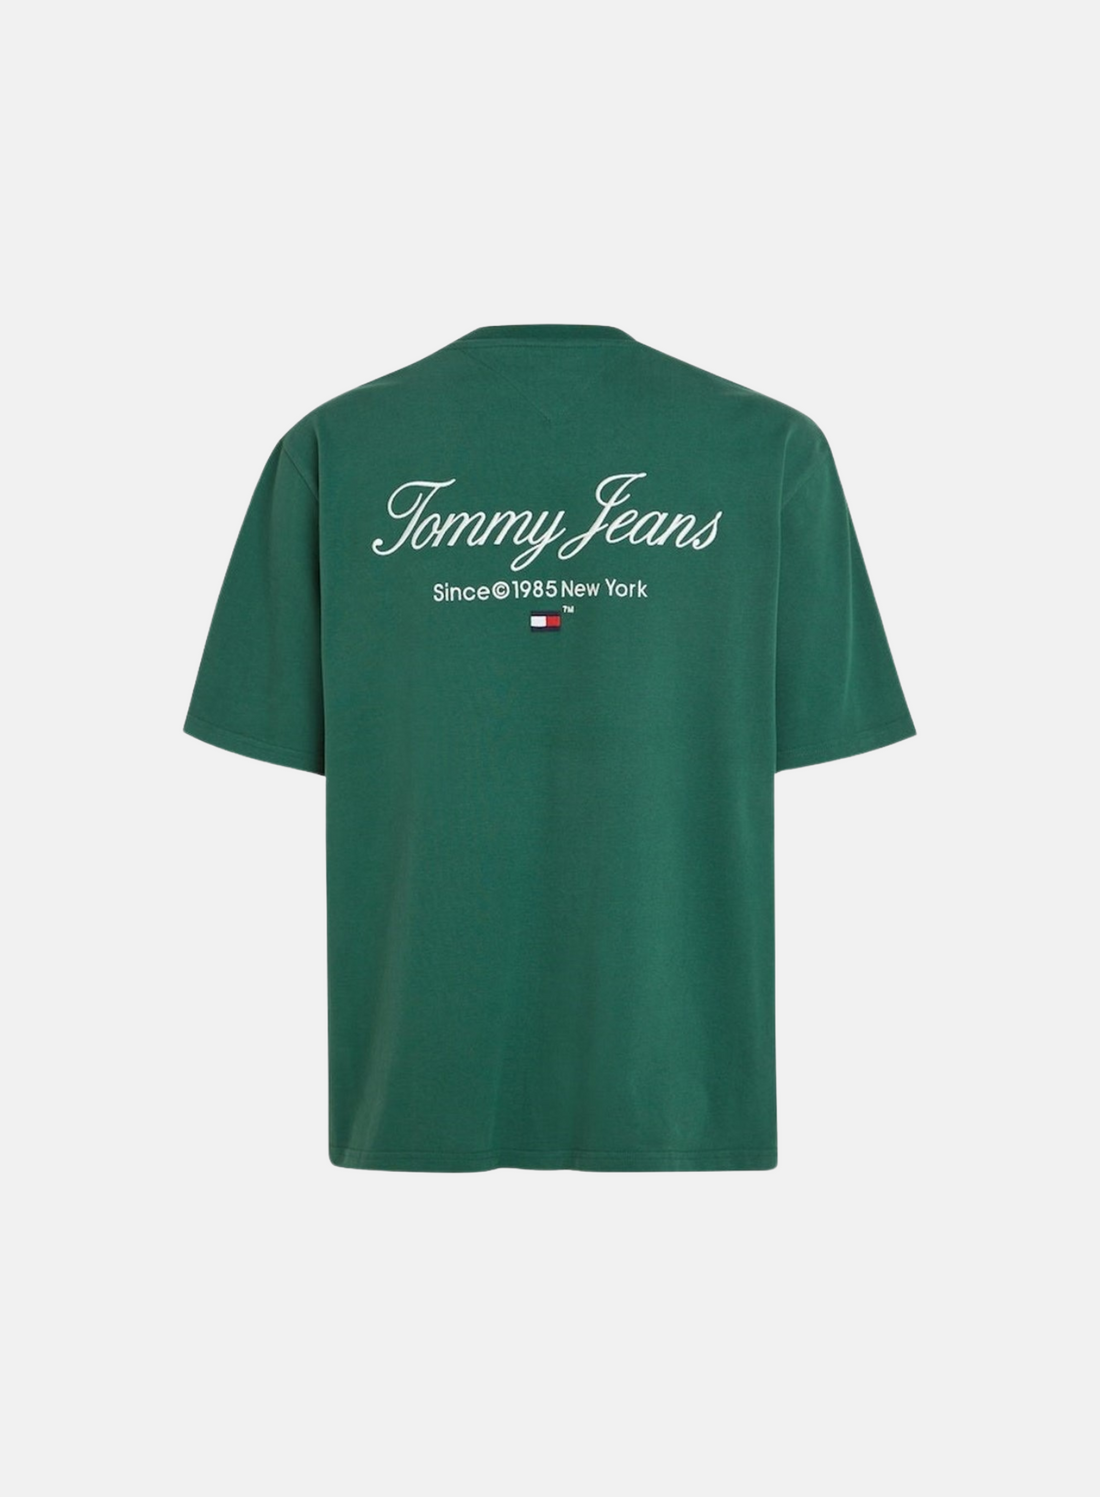 Tommy Jeans Classic Oversized Serif Tee Dark Green - Hympala Store 